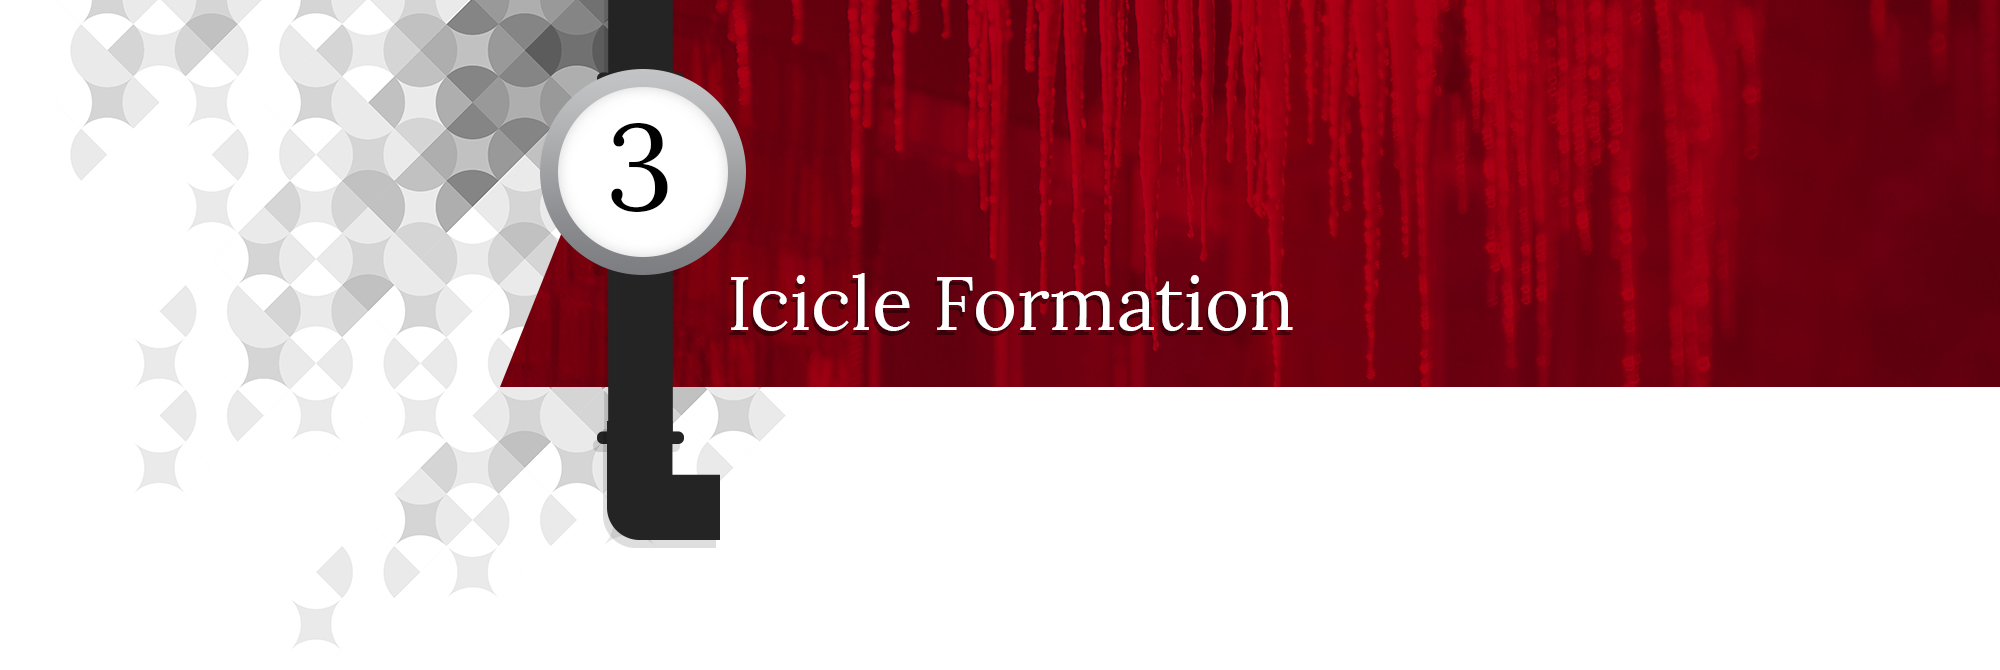 Icicle-Formation-5fbb4b7517c3a